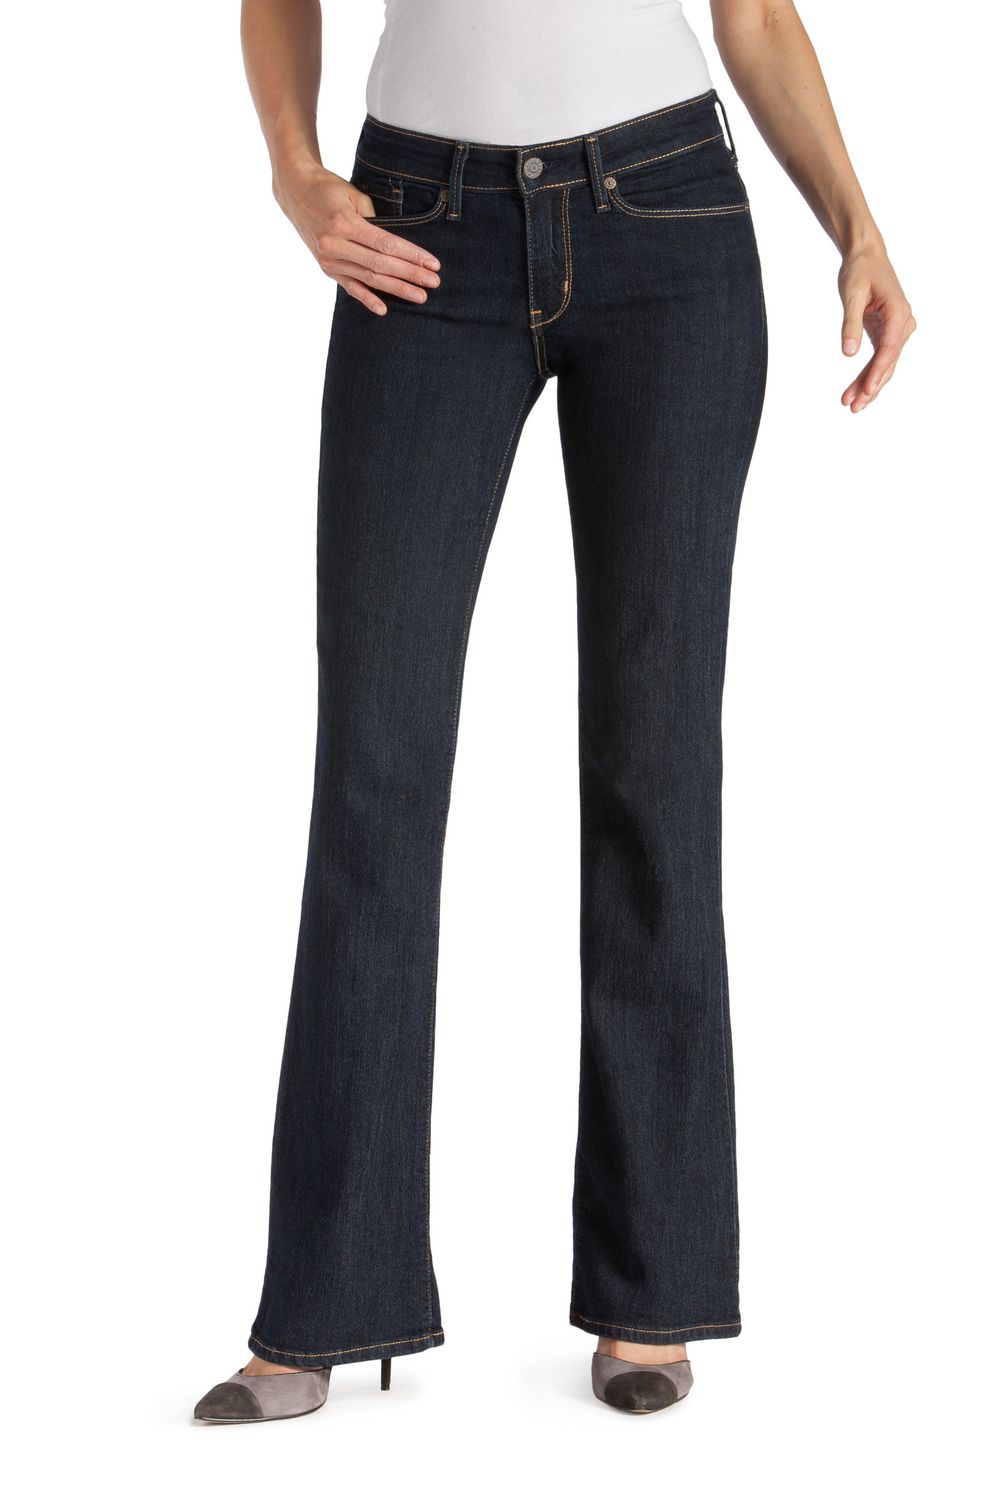 Signature by Levi Strauss & Co. Women's Bootcut Jeans | Walmart Canada